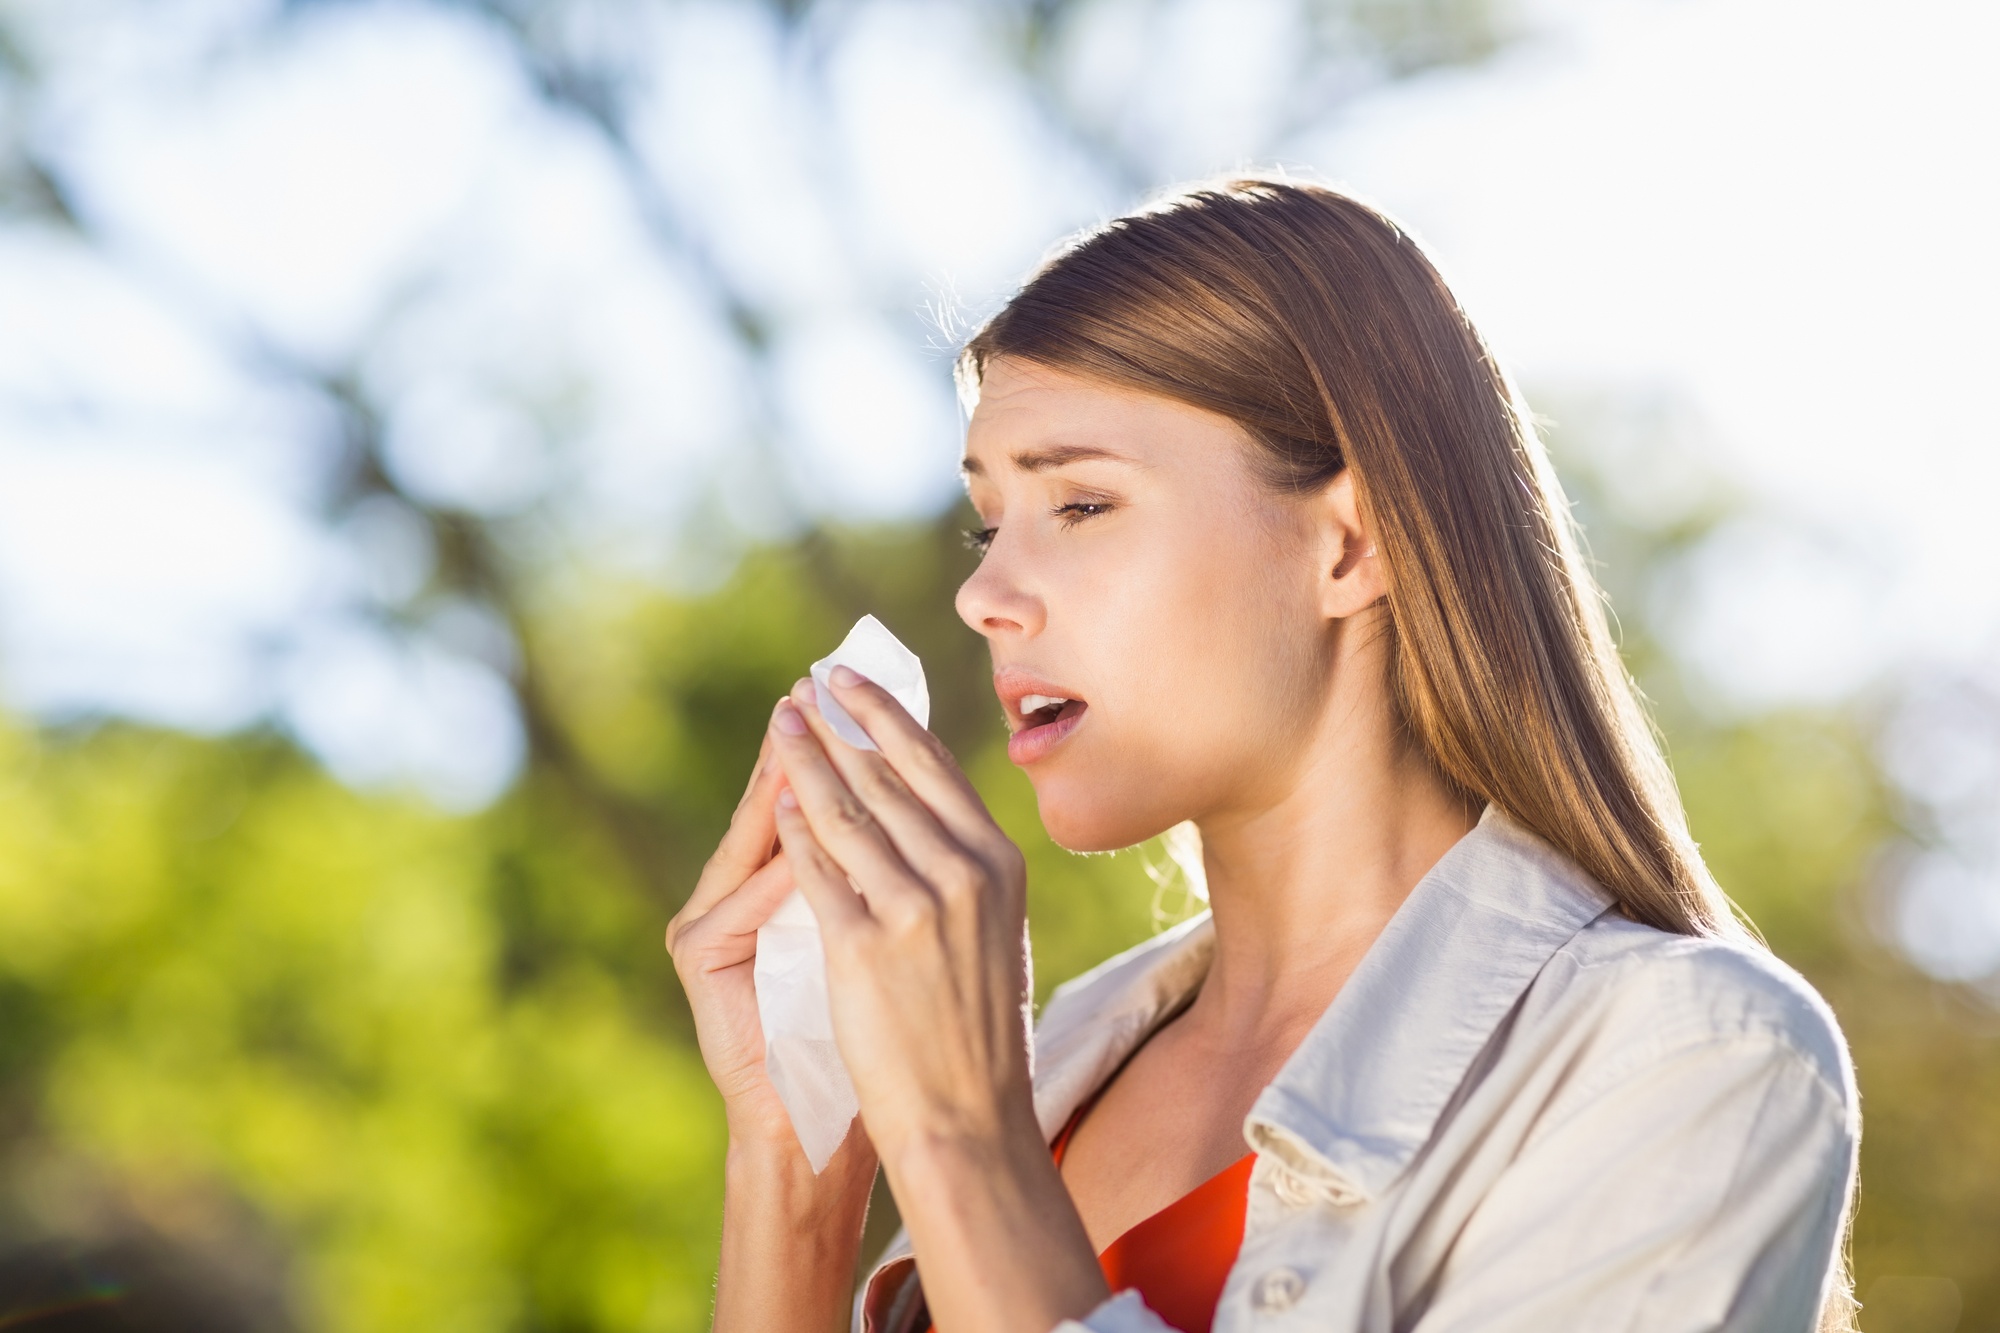 A woman with pollen allergies, sneezing into a tissue.